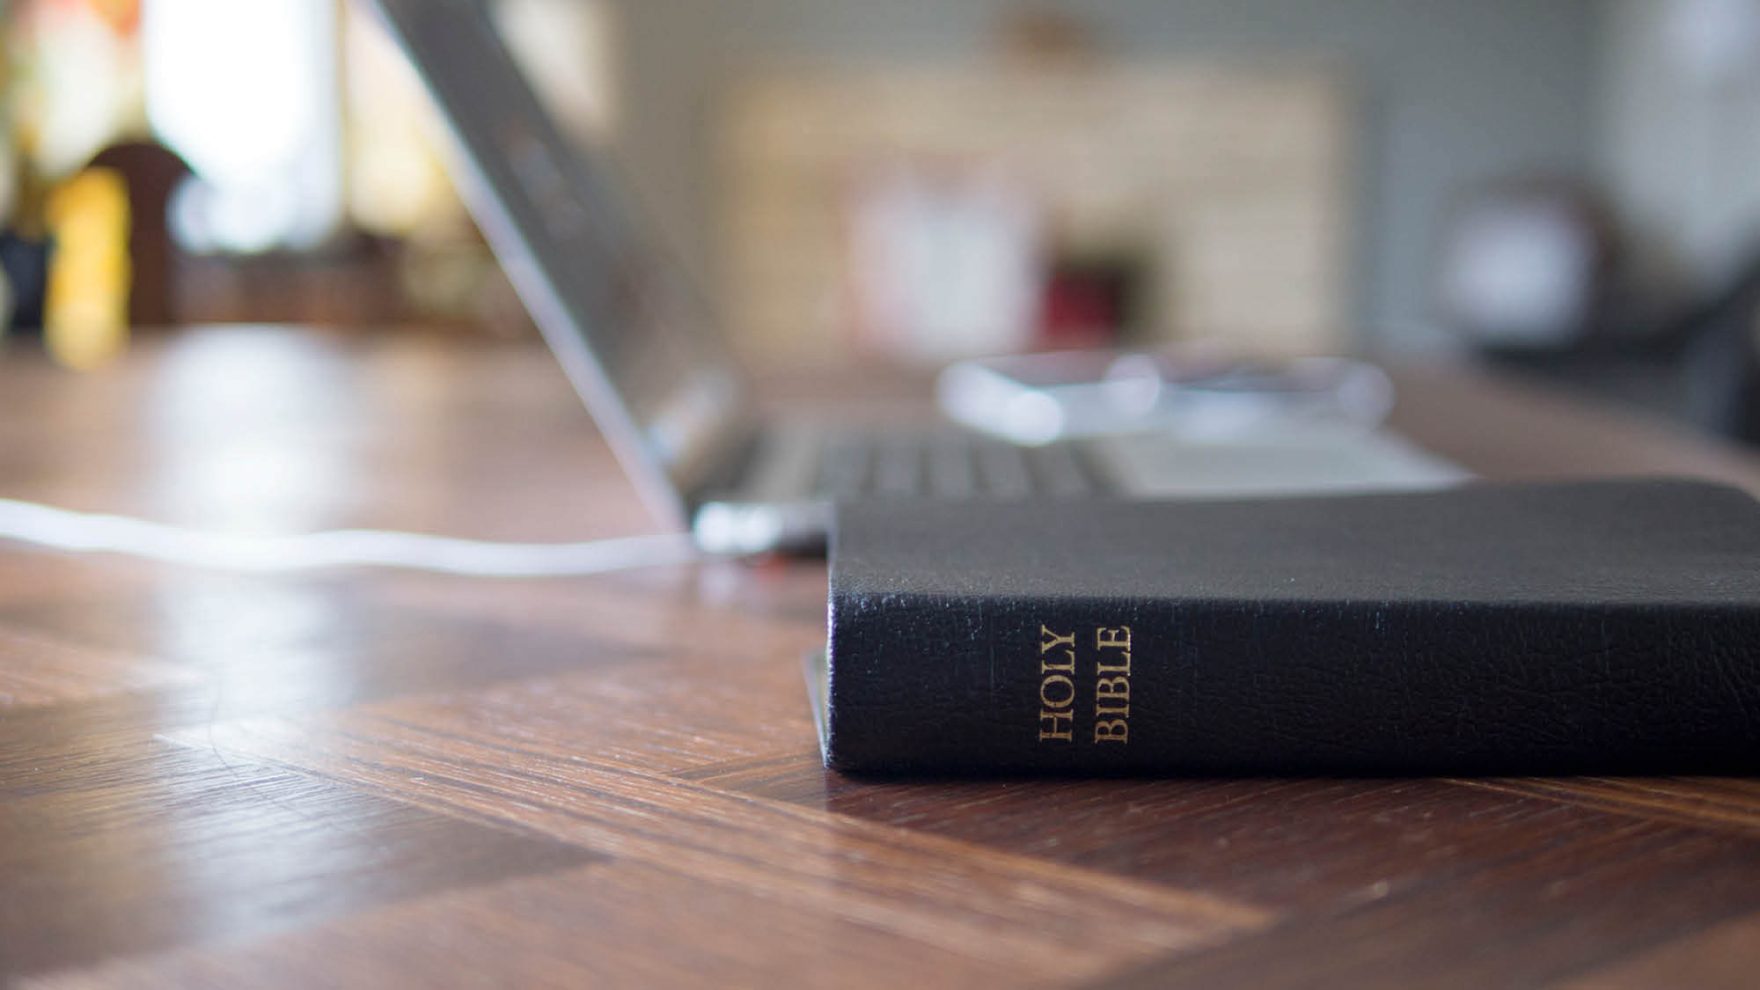 The Holy Bible next to a laptop: Explore the master of Divinity in Theology & Ministry in Biblical Studies at Regent University.